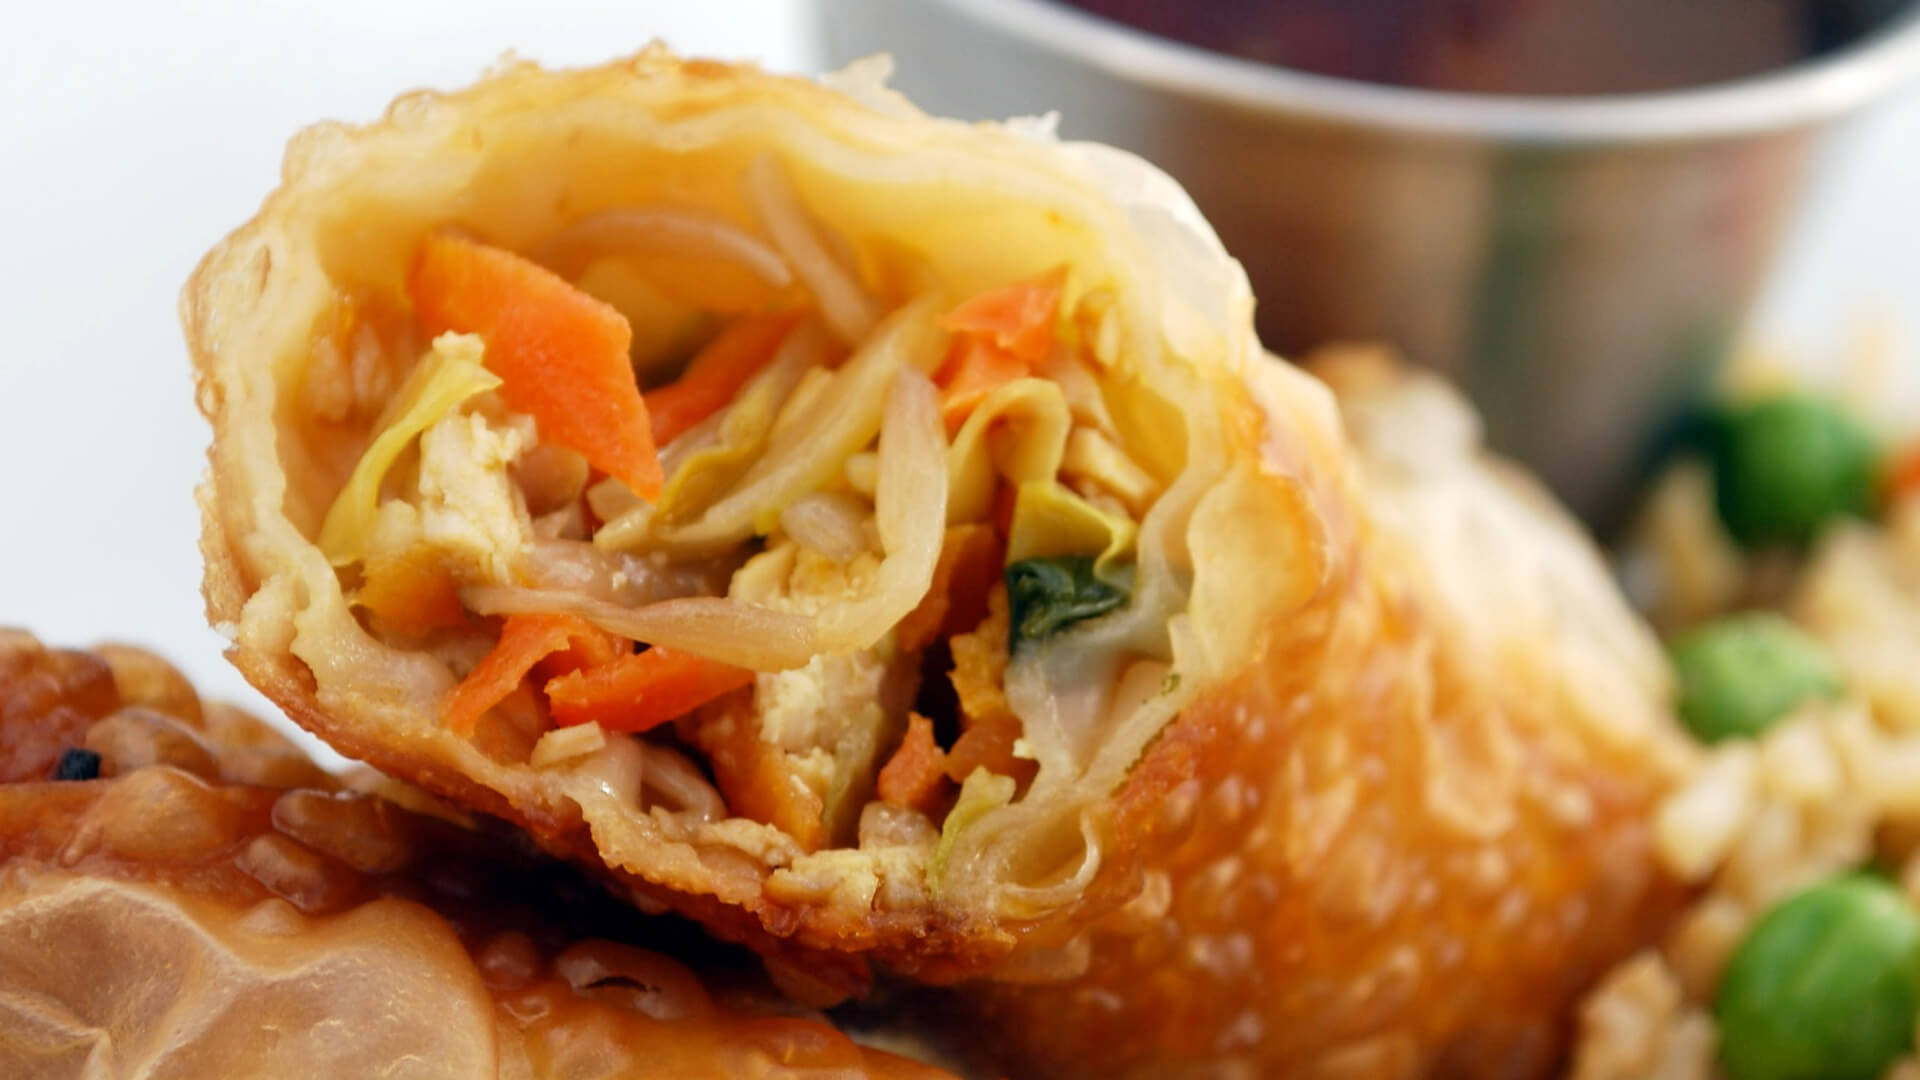 Chicken Egg Roll Recipe – RasoiMenu | A Collection of Tasty Recipes For